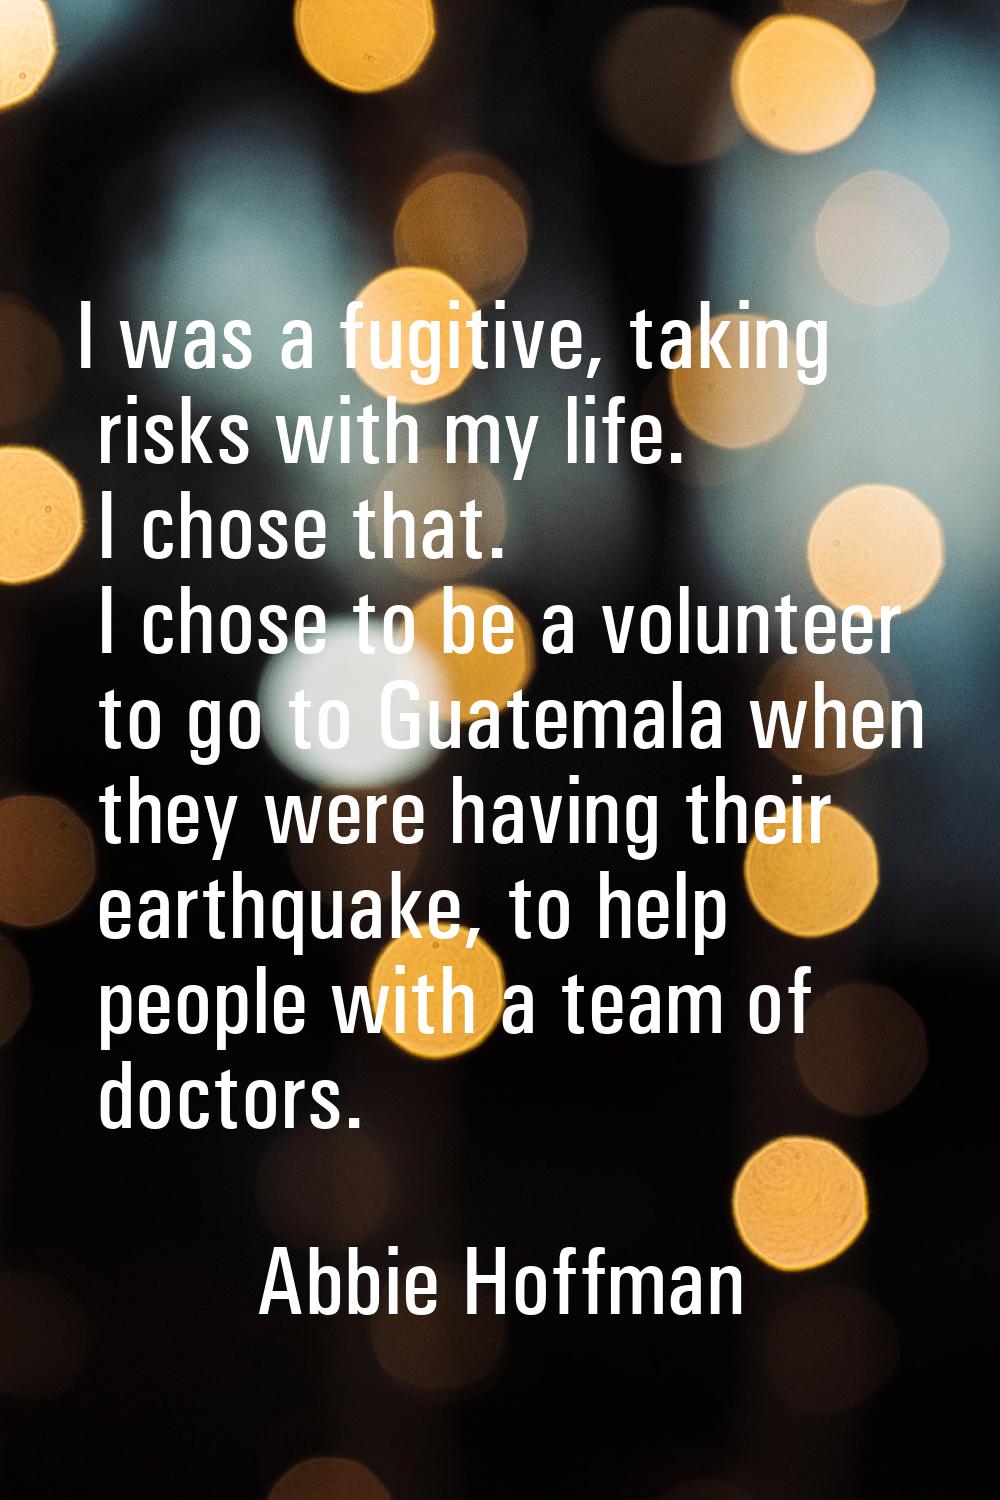 I was a fugitive, taking risks with my life. I chose that. I chose to be a volunteer to go to Guate